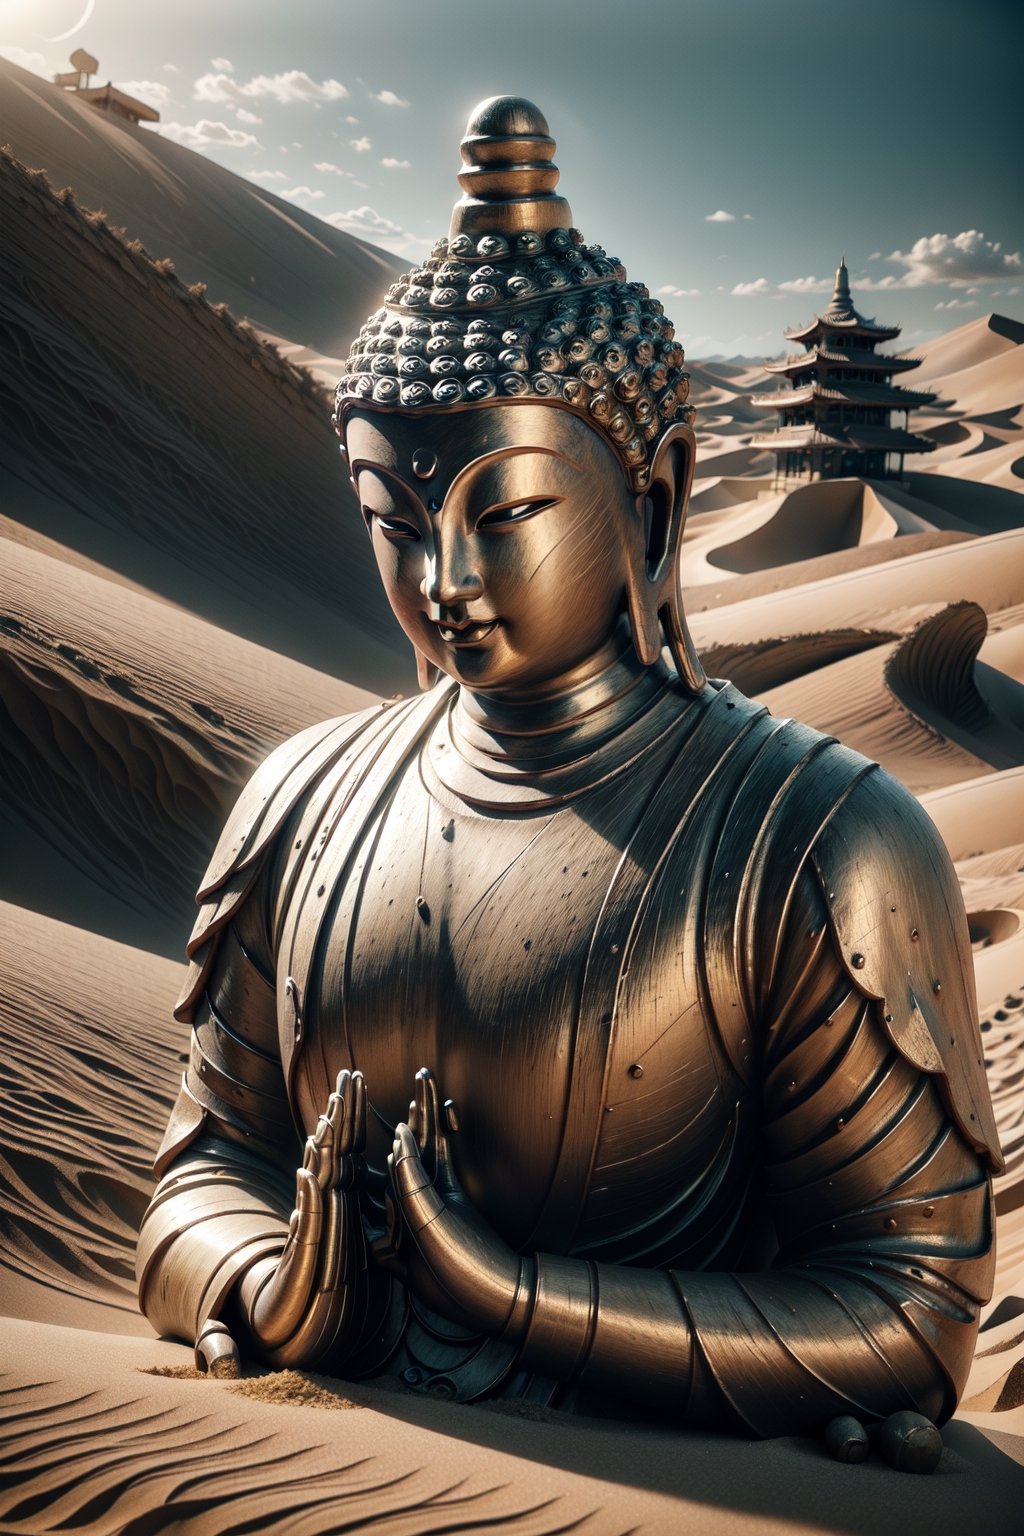 Doton, Doton no Jutsu, (1boy:1.5), solo, ninja, ninja clothes, (Buddha statues:1.2), (Buddha statues made of sand:1.5),
Outdoors, dune, desert, 
fighting stance,
(Masterpiece, Best Quality, 8k:1.2), (Ultra-Detailed, Highres, Extremely Detailed, Absurdres, Incredibly Absurdres, Huge Filesize:1.1), (Photorealistic:1.3), By Futurevolab, Portrait, Ultra-Realistic Illustration, Digital Painting. 